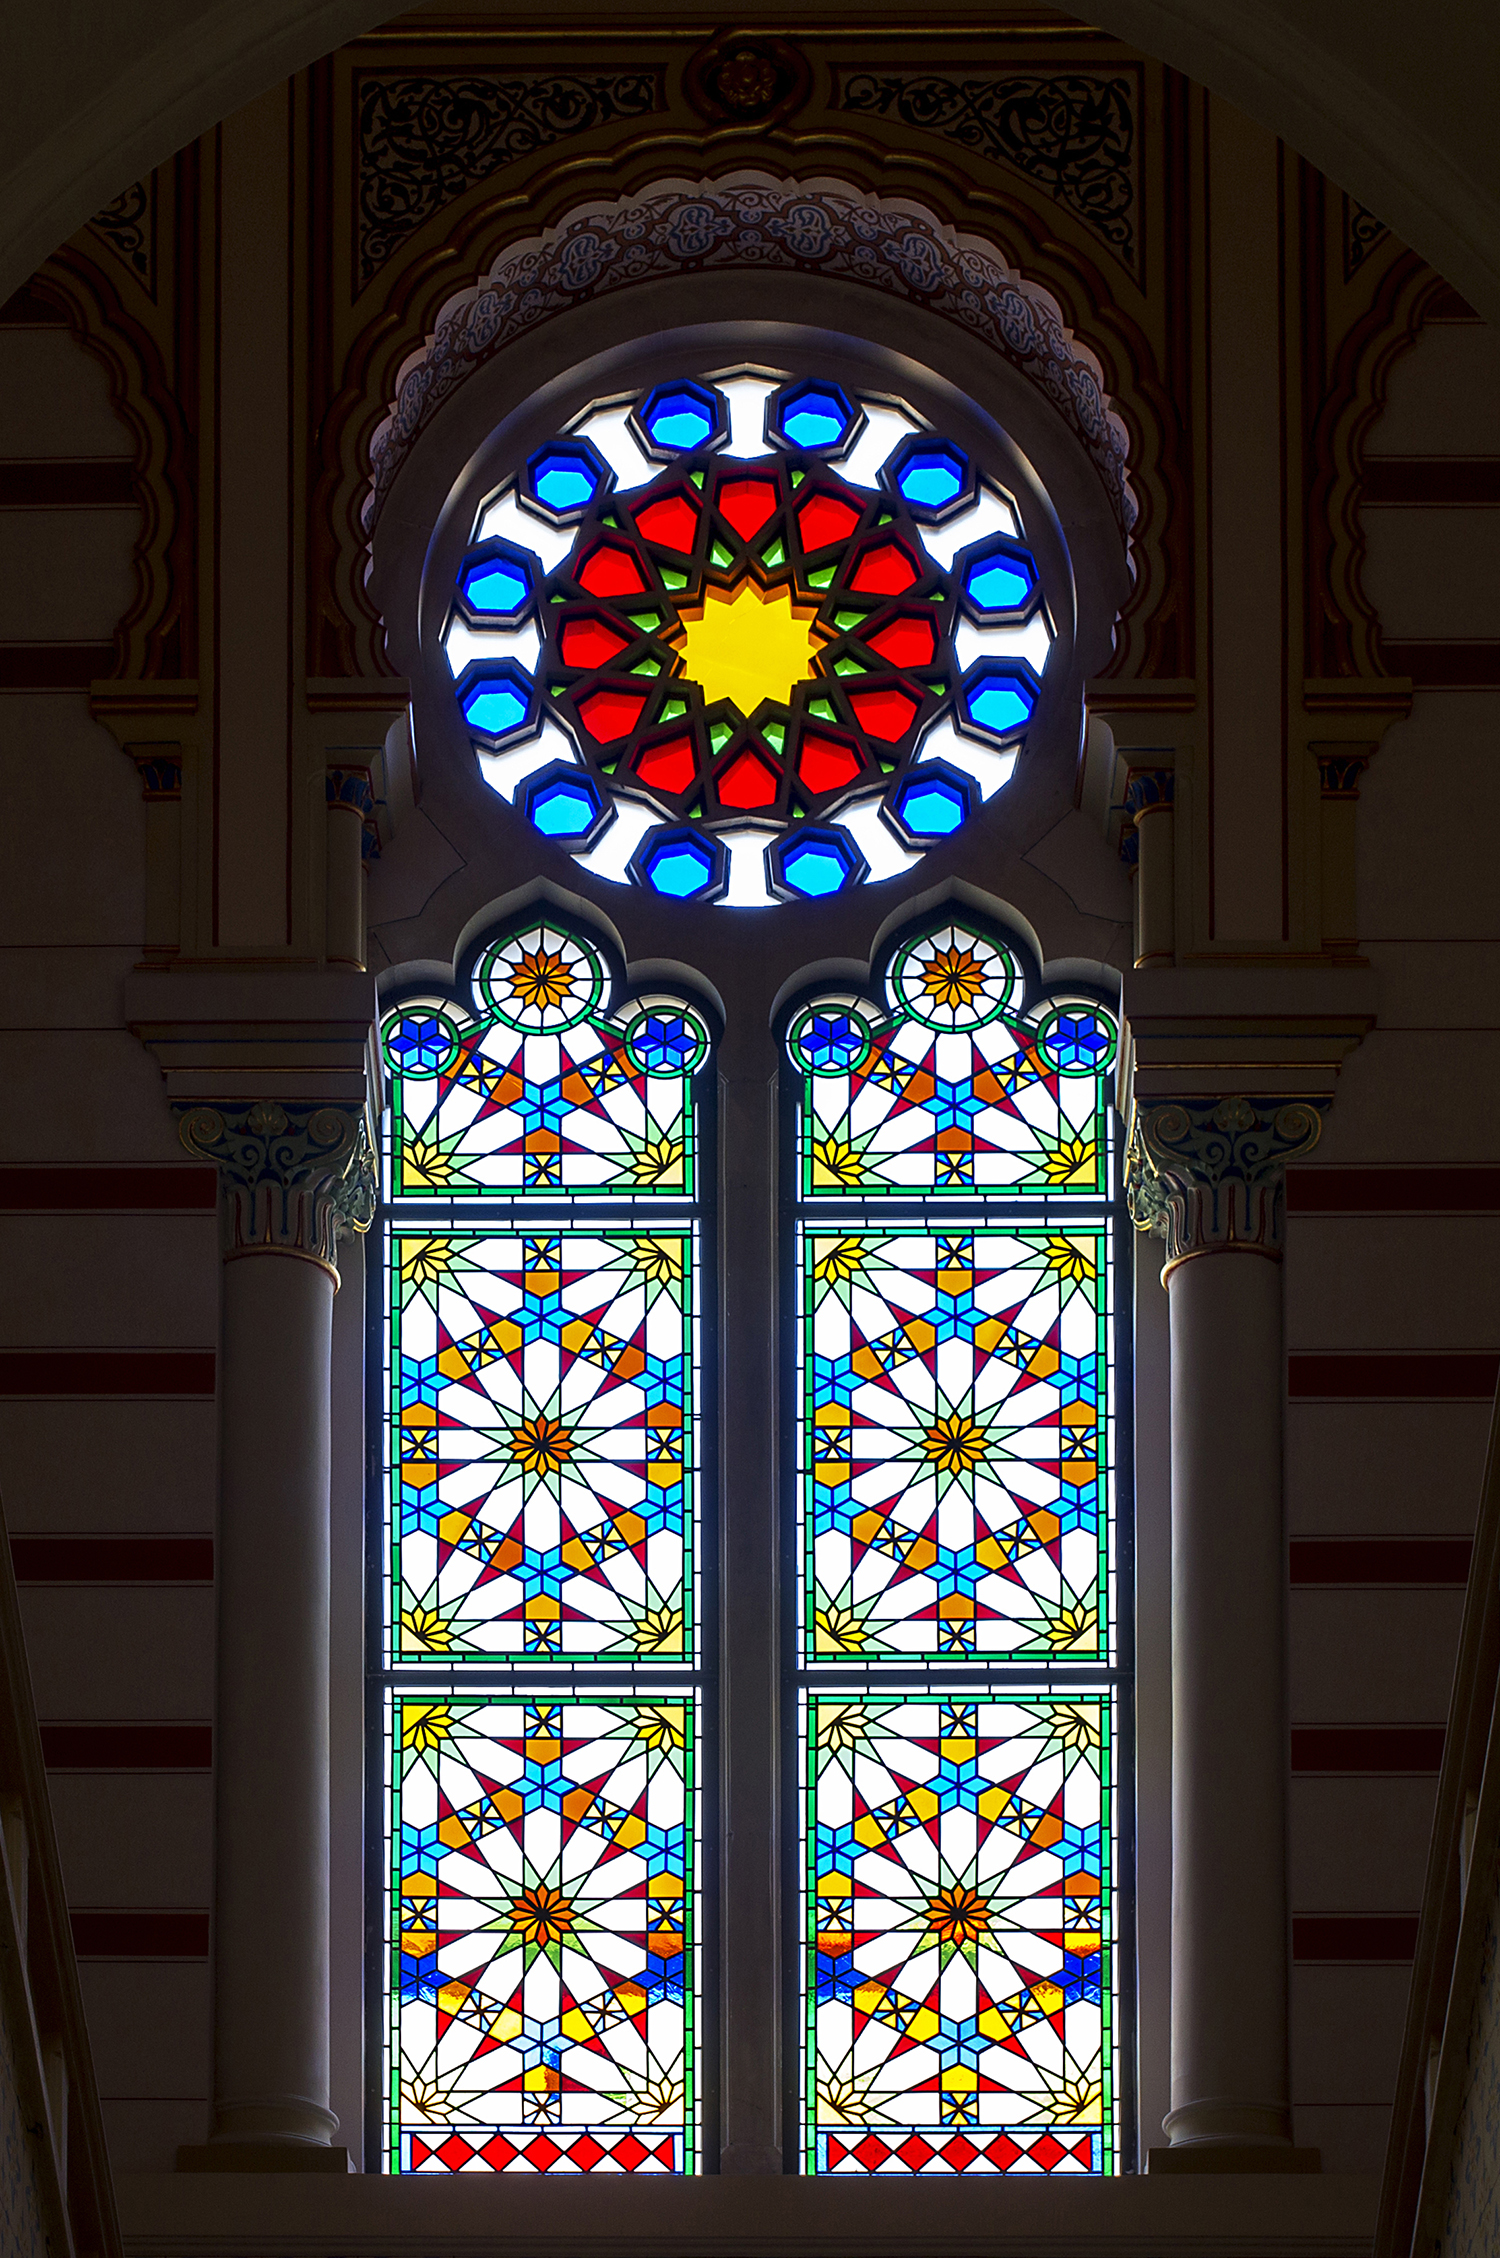 Main staircase stained glass window after restoration